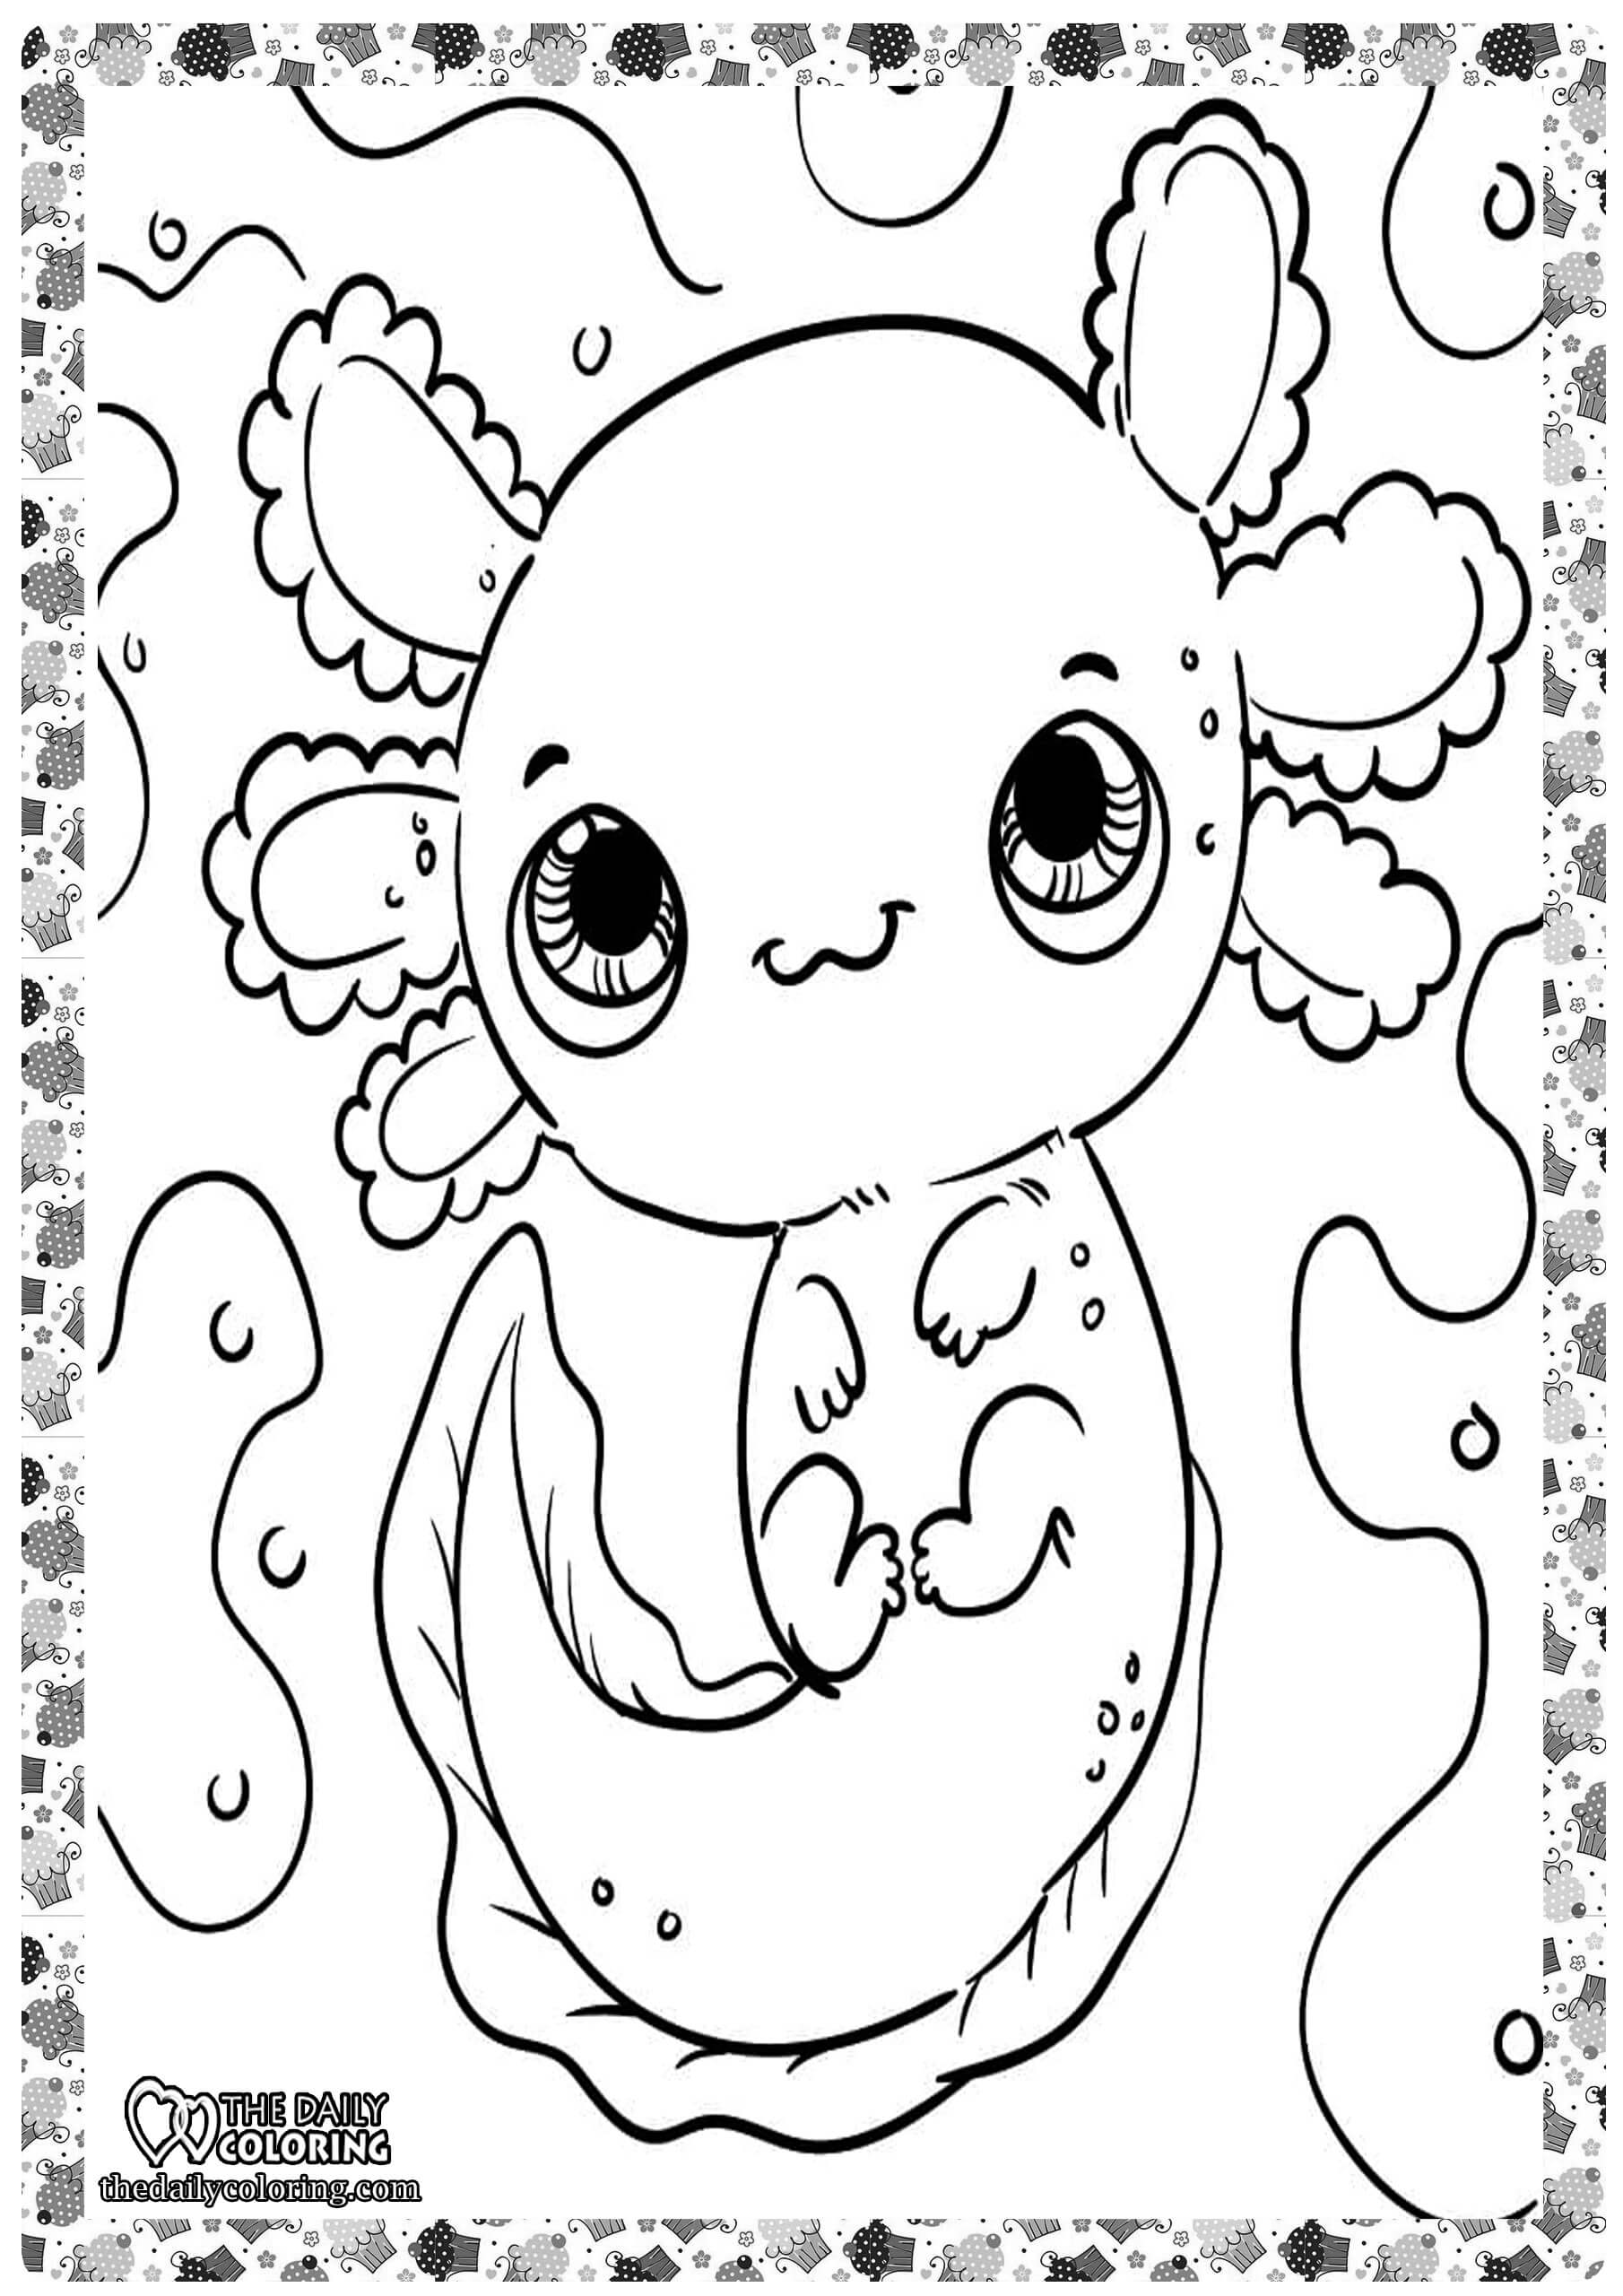 Axolotl Coloring Pages - The Daily Coloring